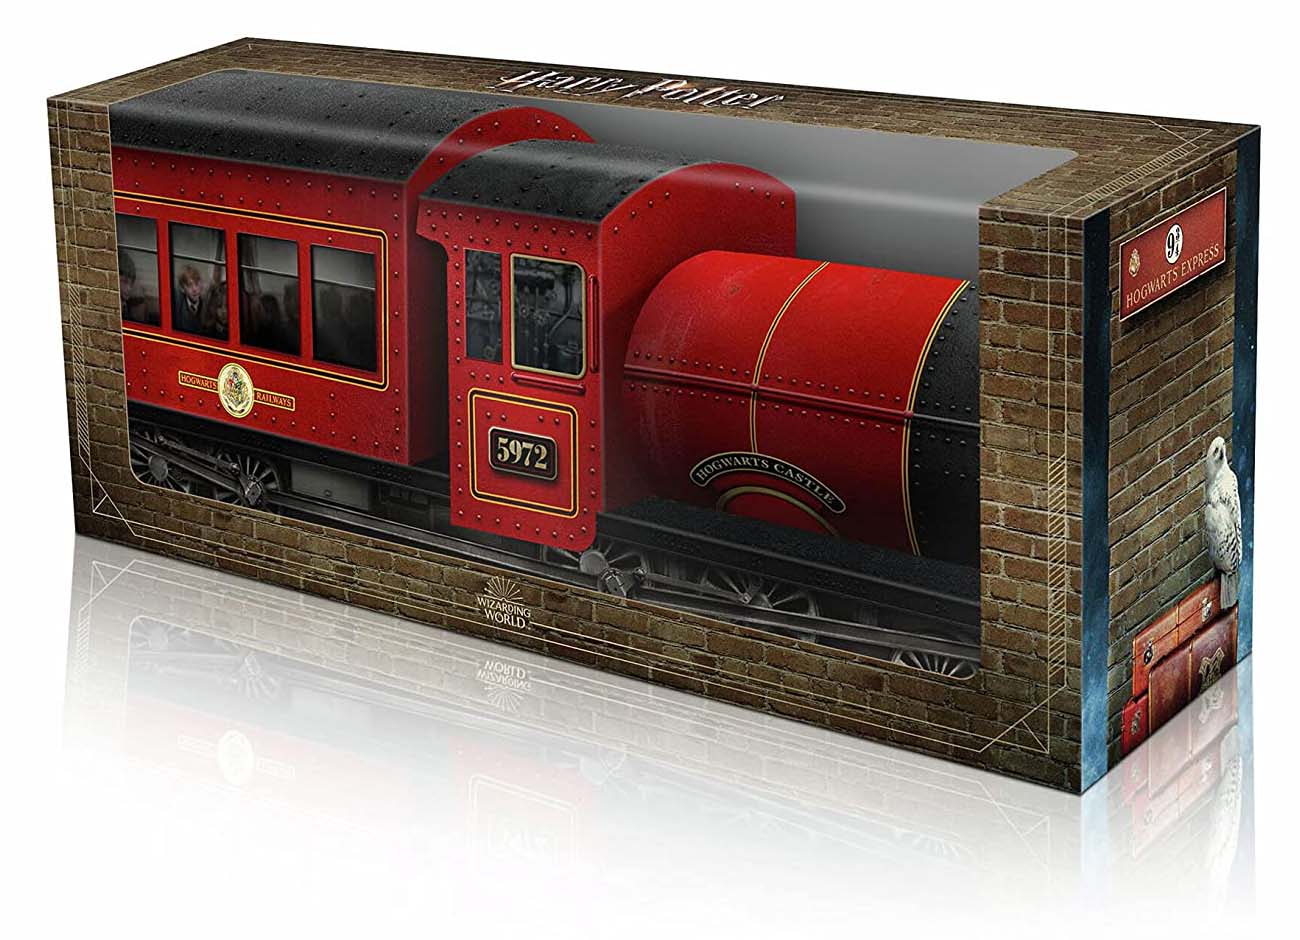 Harry Potter and the Sorcerer’s Stone Anniversary 8-Film Collectors Edition 4k Blu-ray train box